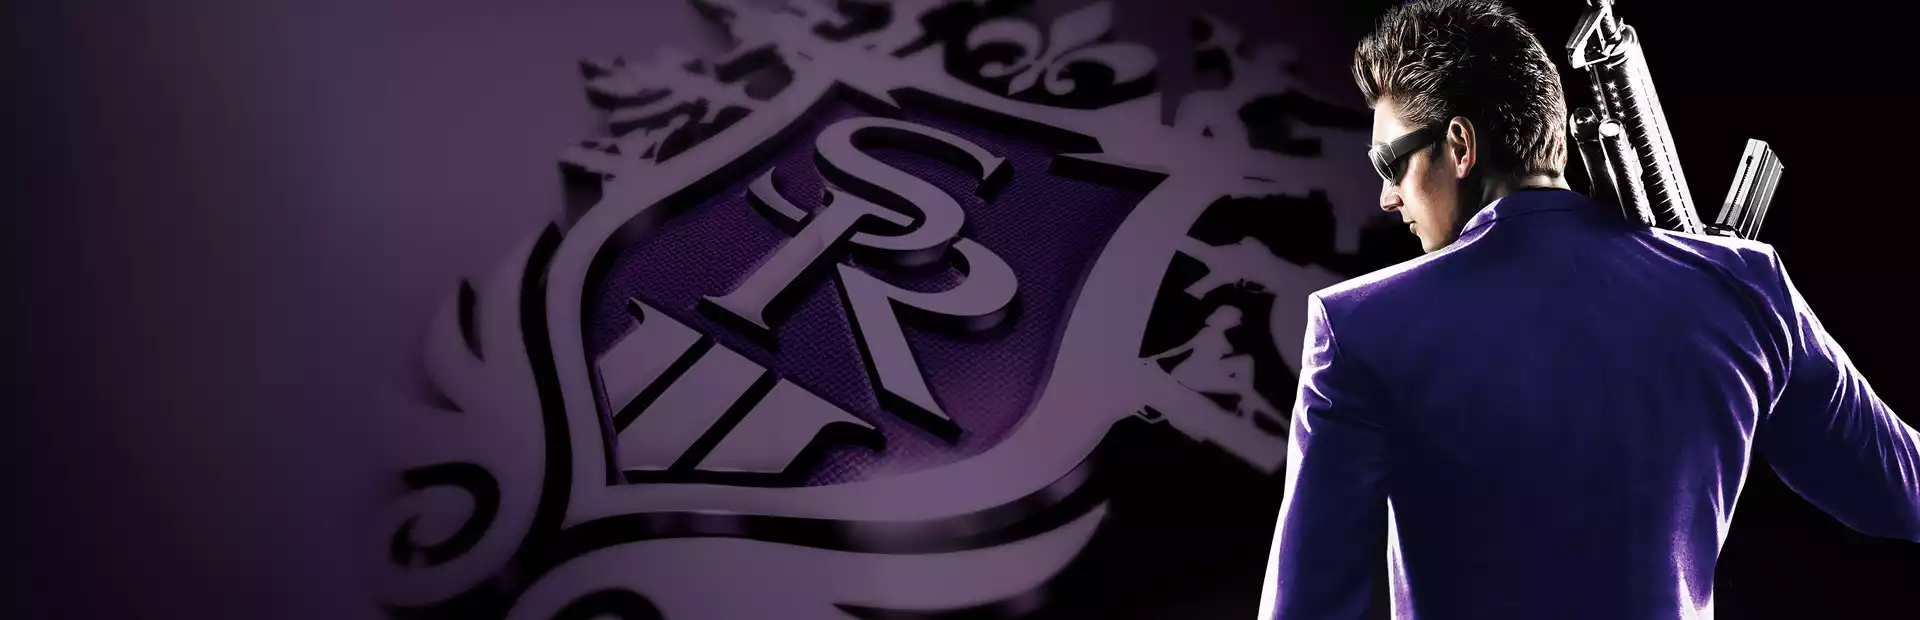 Saints Row: The Third The Full Package Steam Key GLOBAL